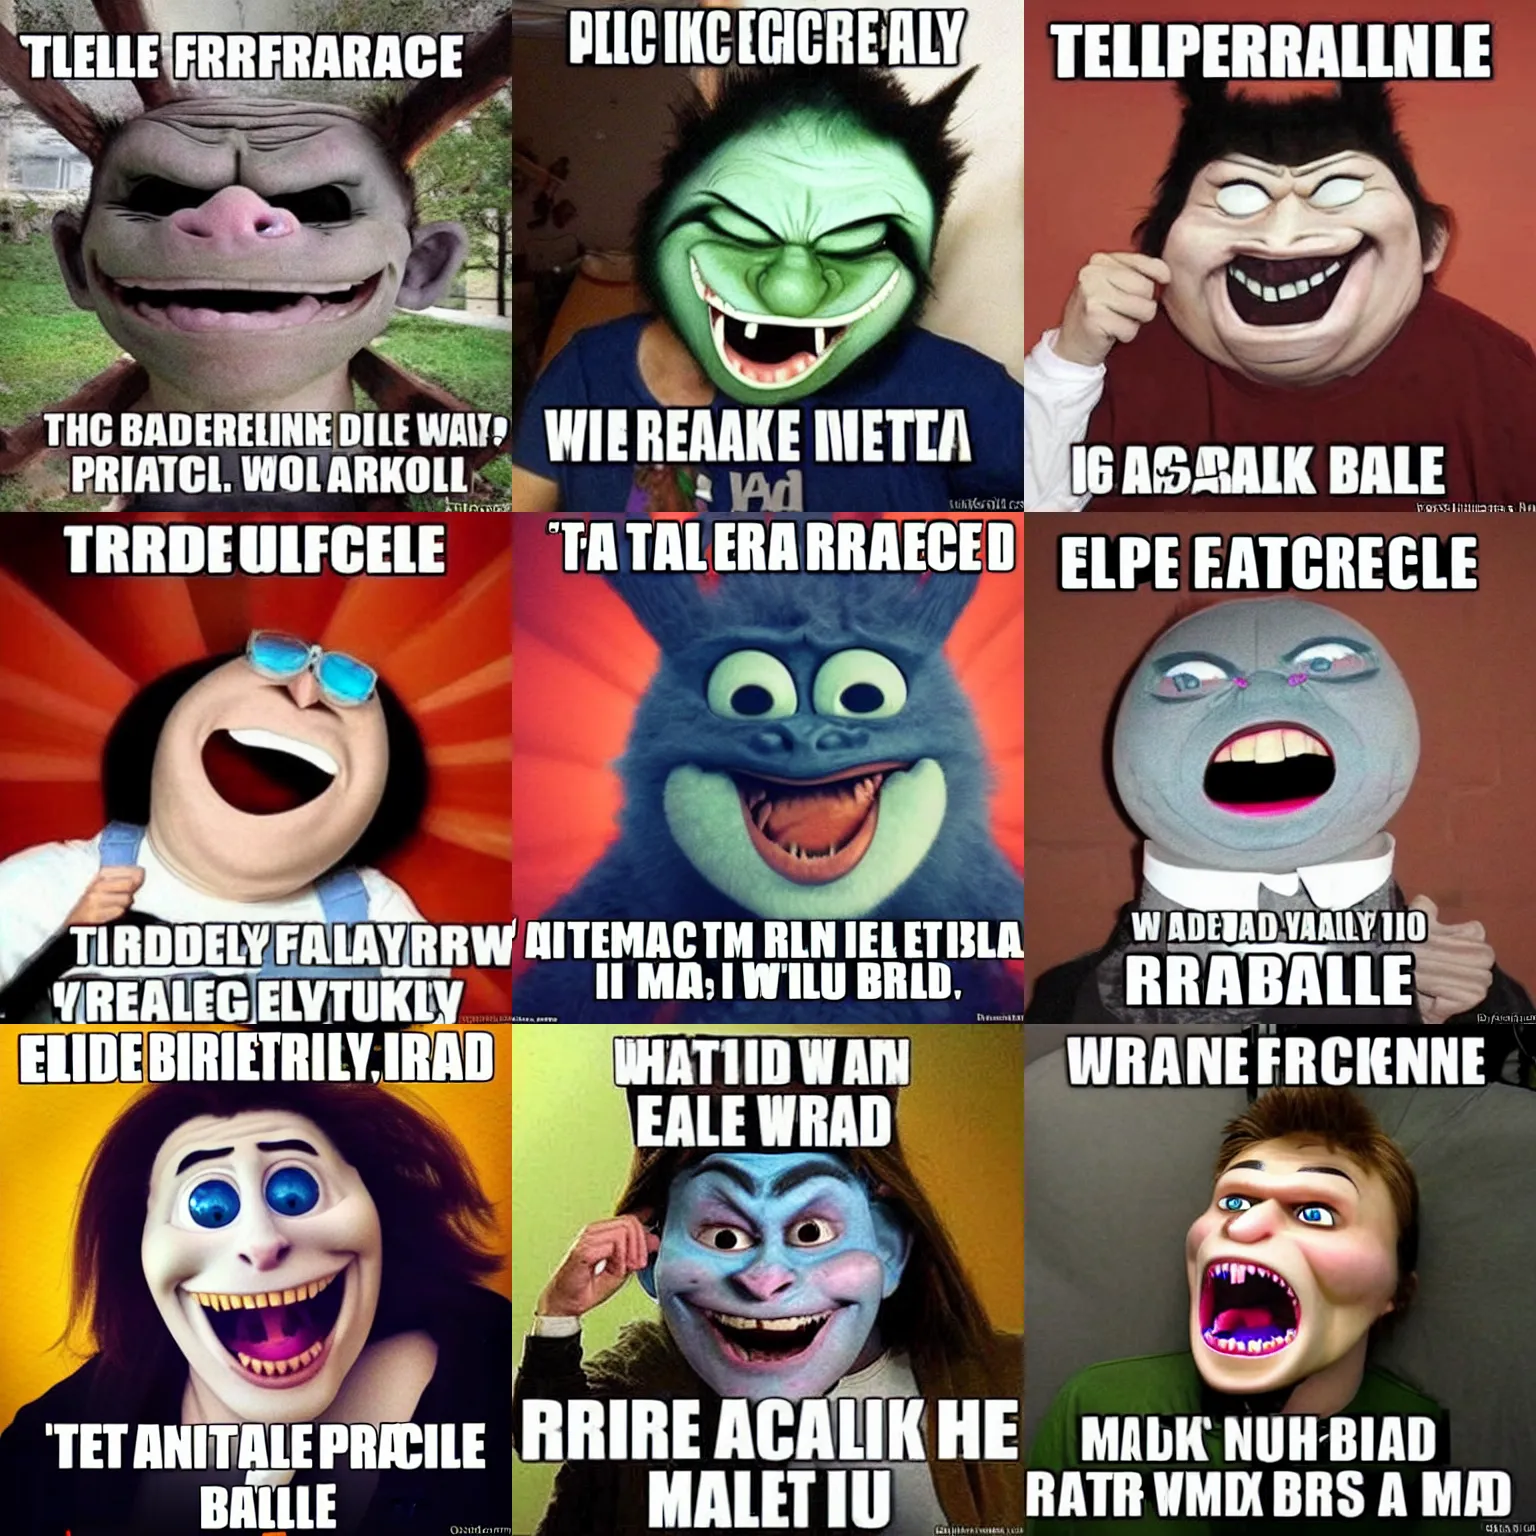 Prompt: trollface, epic, epically pranked, so freakin awesome, u mad bro, me gusta